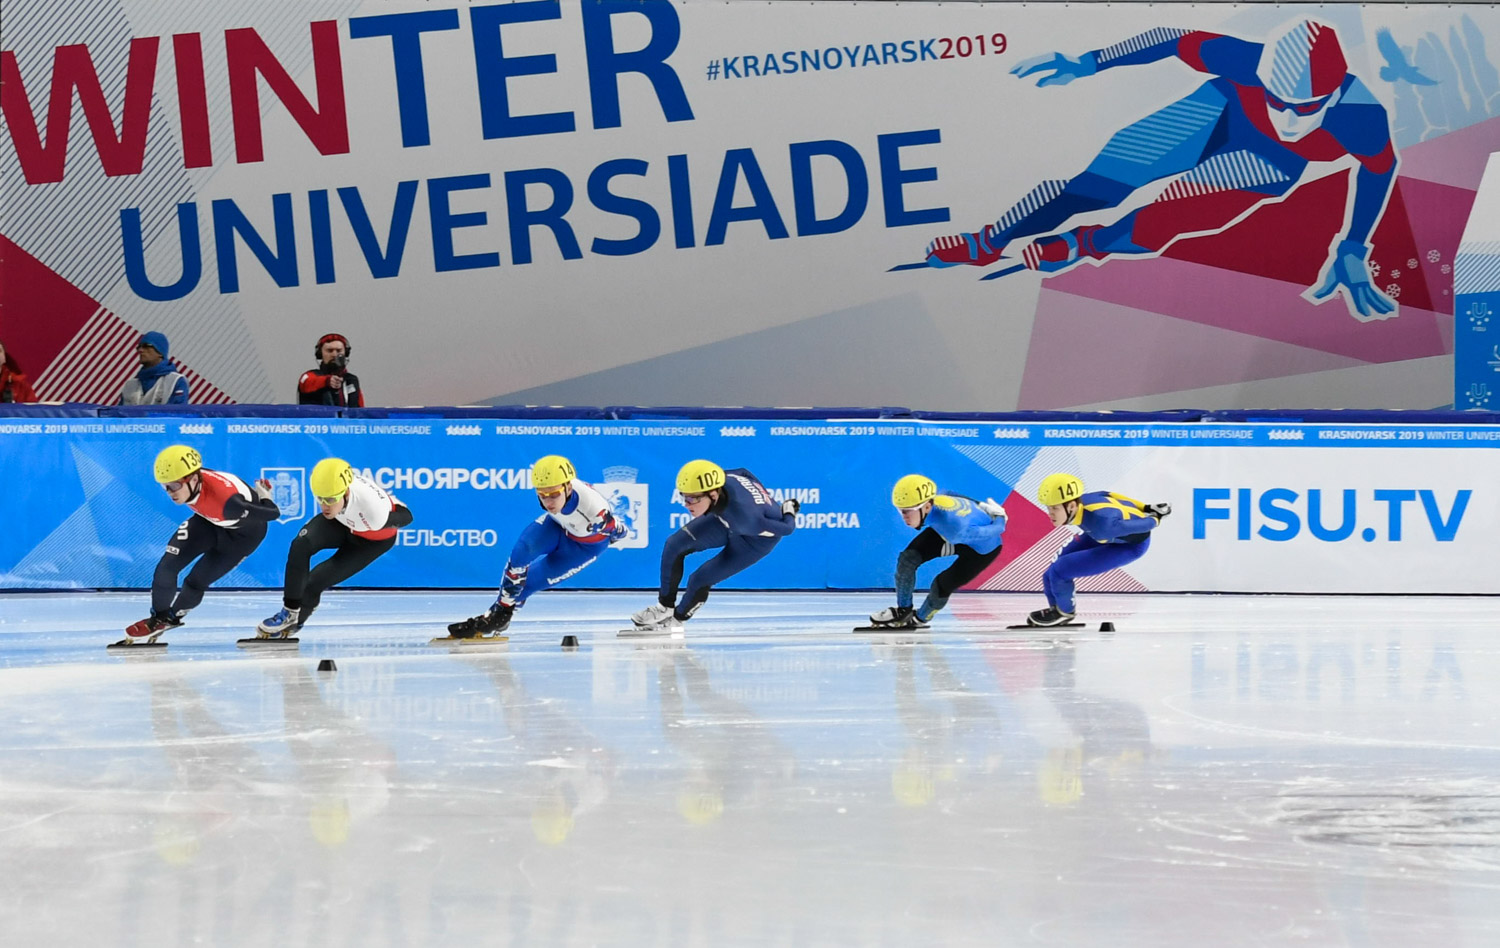 China's An snatches short track gold as South Korean team-mates collide at Winter Universiade